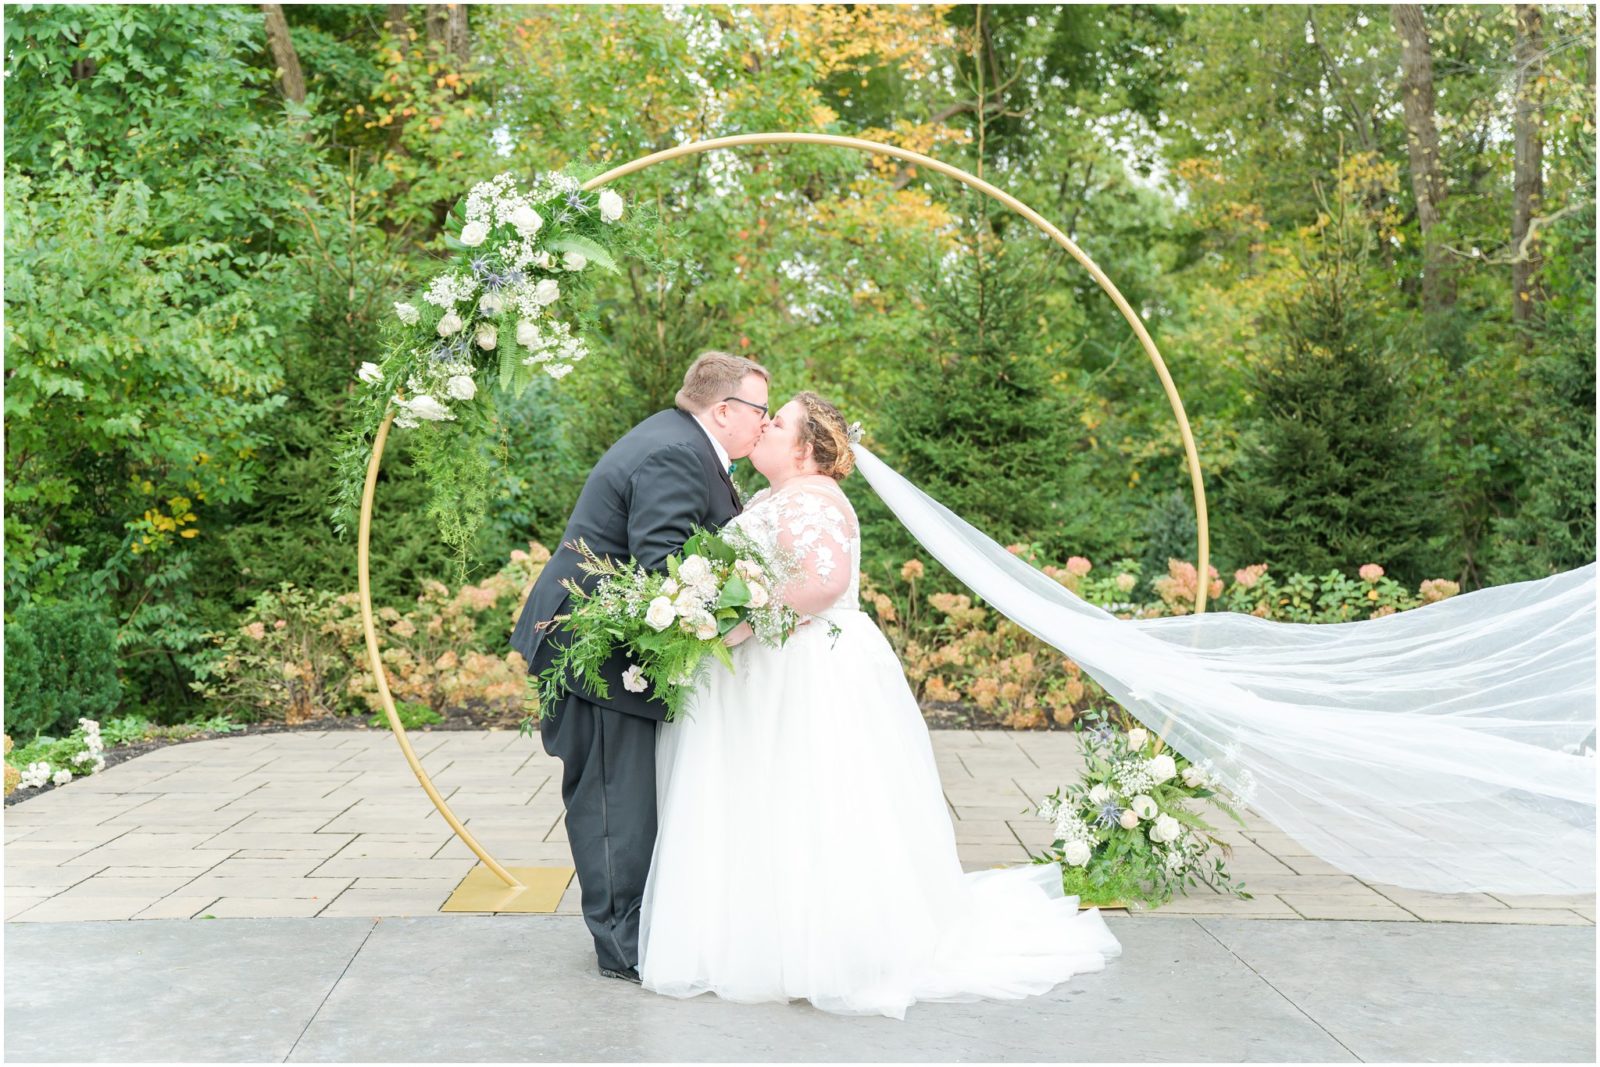 Dip kiss in front of floral arch Balmoral House wedding